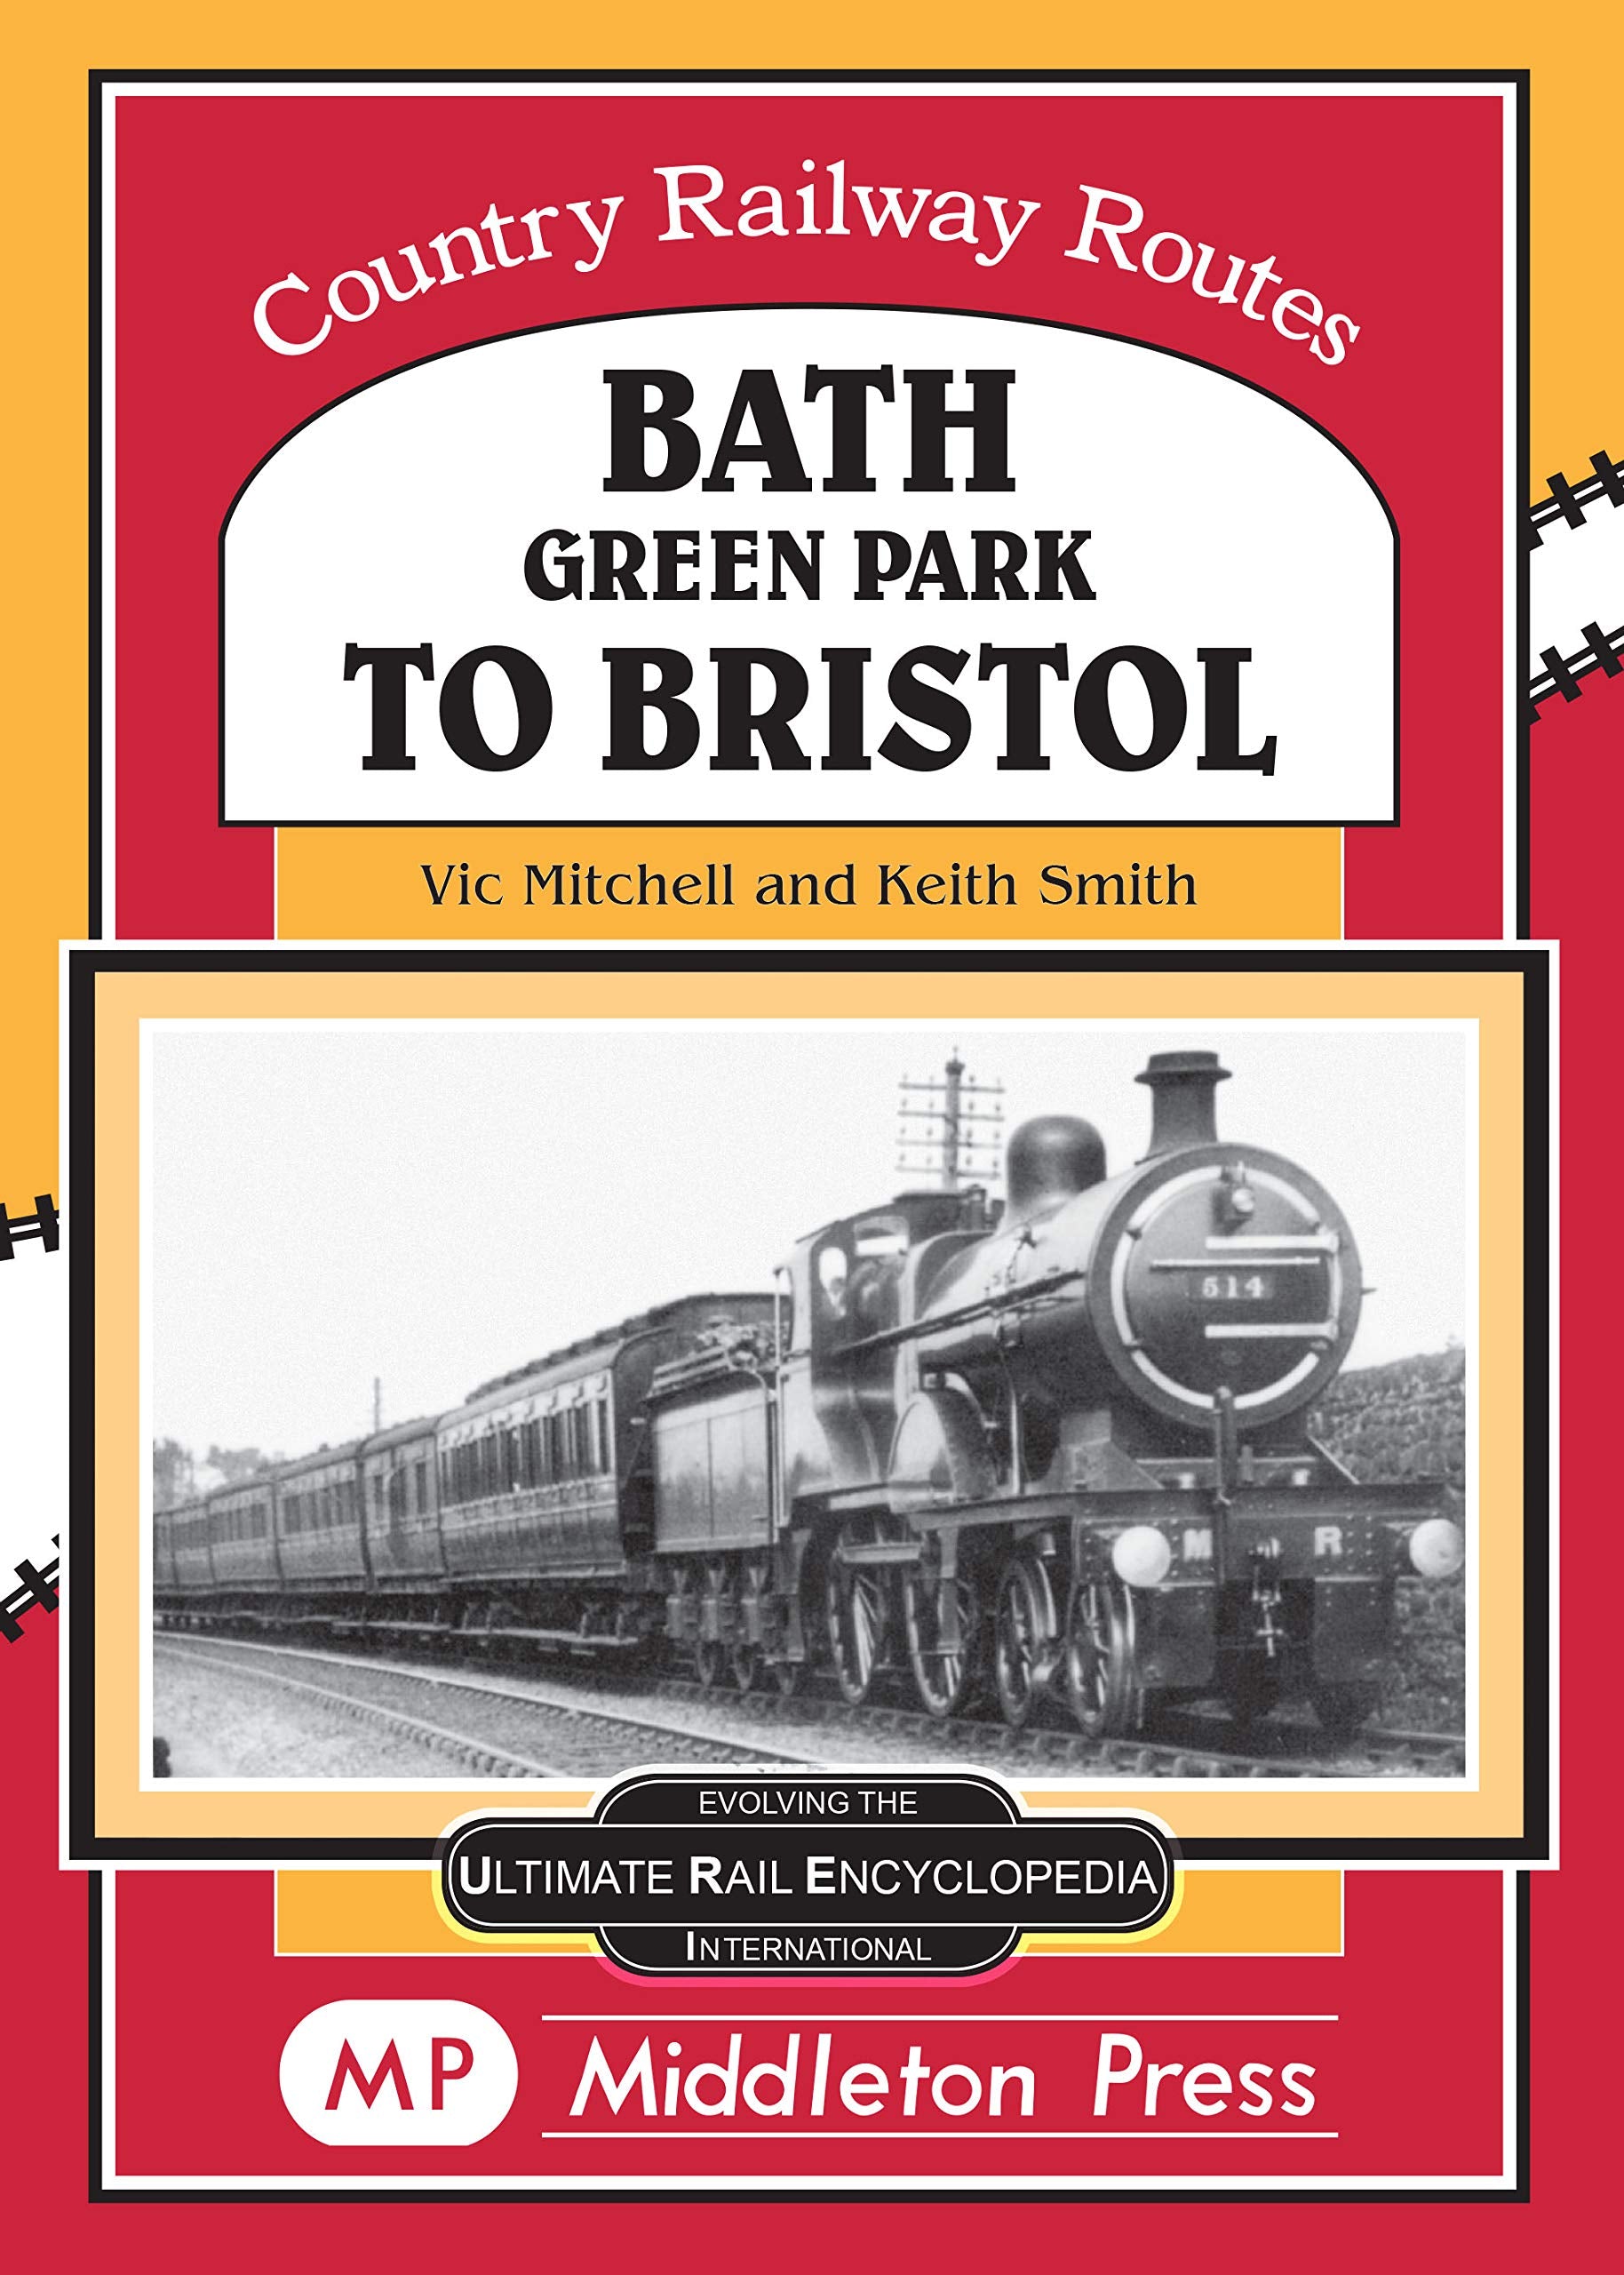 Country Railway Routes Bath Green Park to Bristol